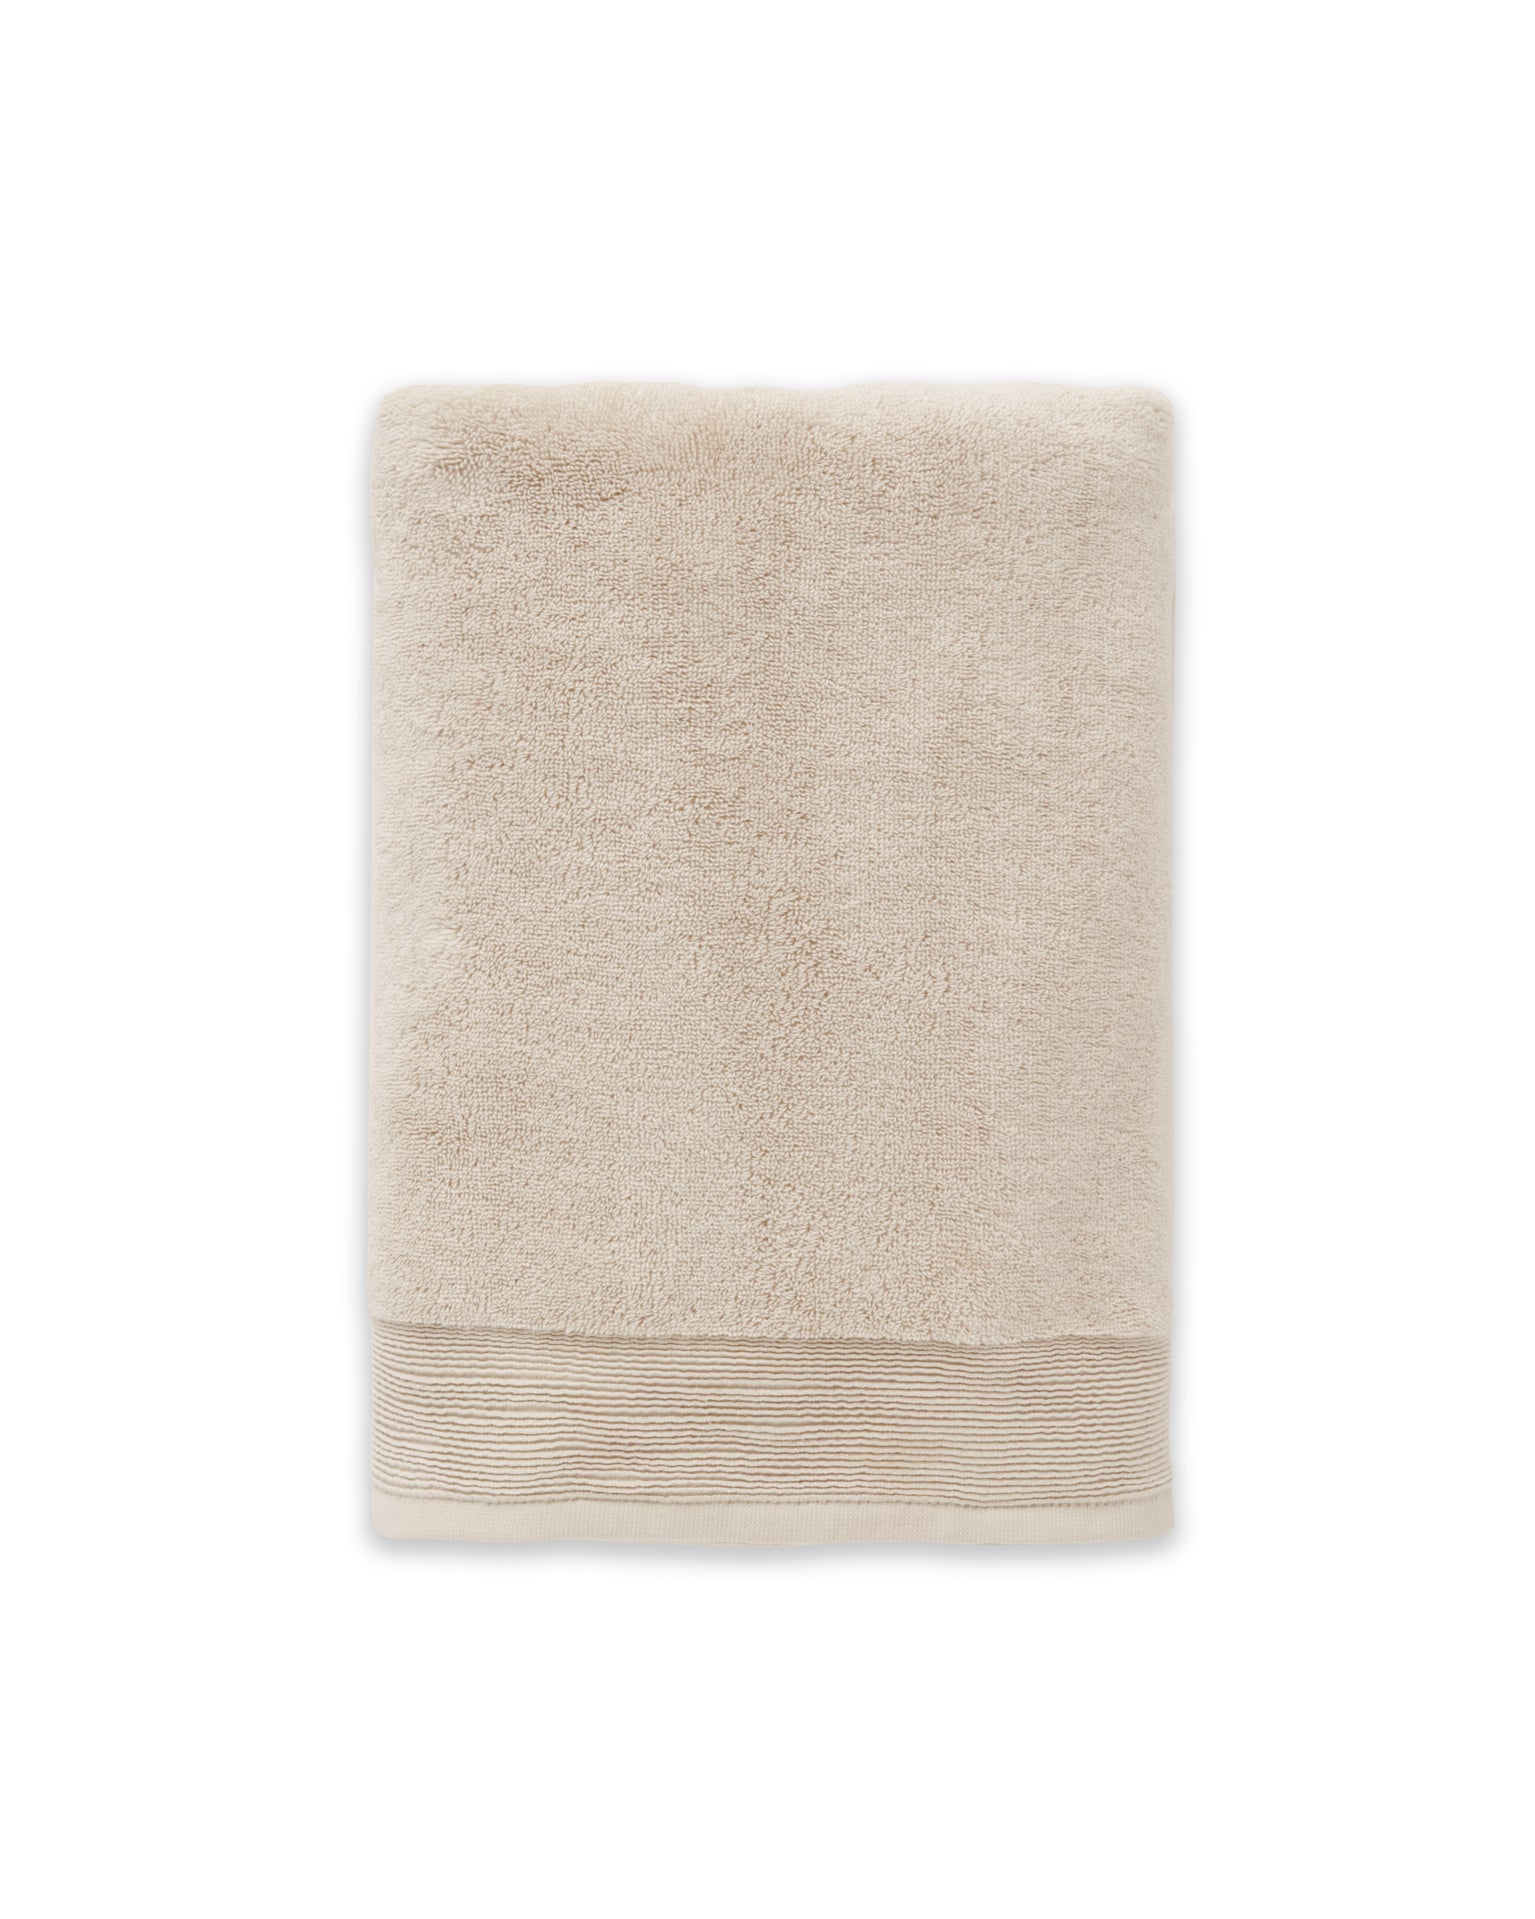 Onsen Plush Bath Towels Complete Set - Luxury, Ultra-Fluffy Bath, Face & Hand Towels, 100% Turkish-Grown Aegean Cotton, Wovey Collection, Fog